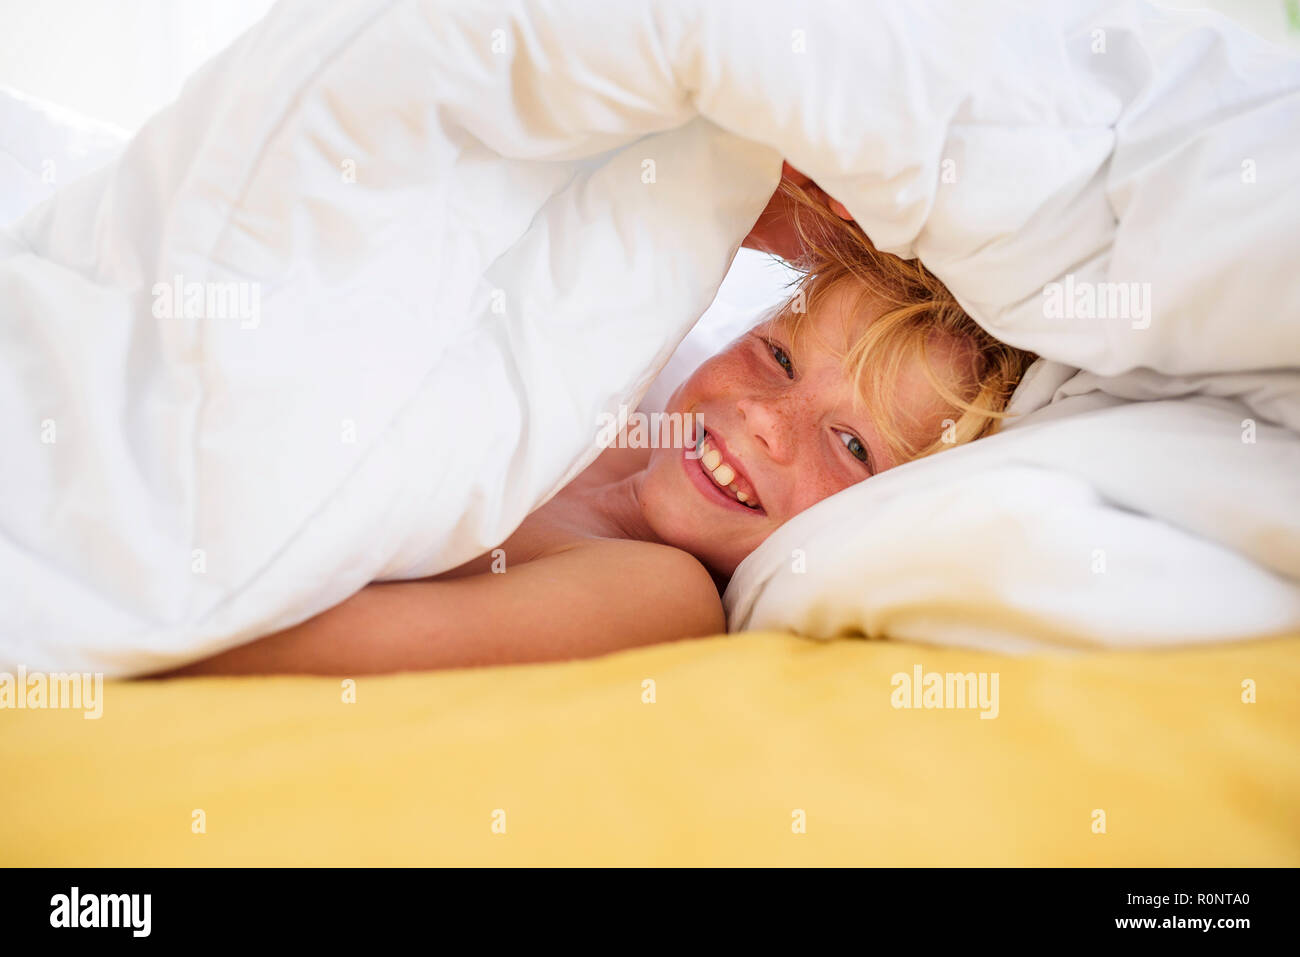 Smiling boy in bed hiding under a duvet Stock Photo